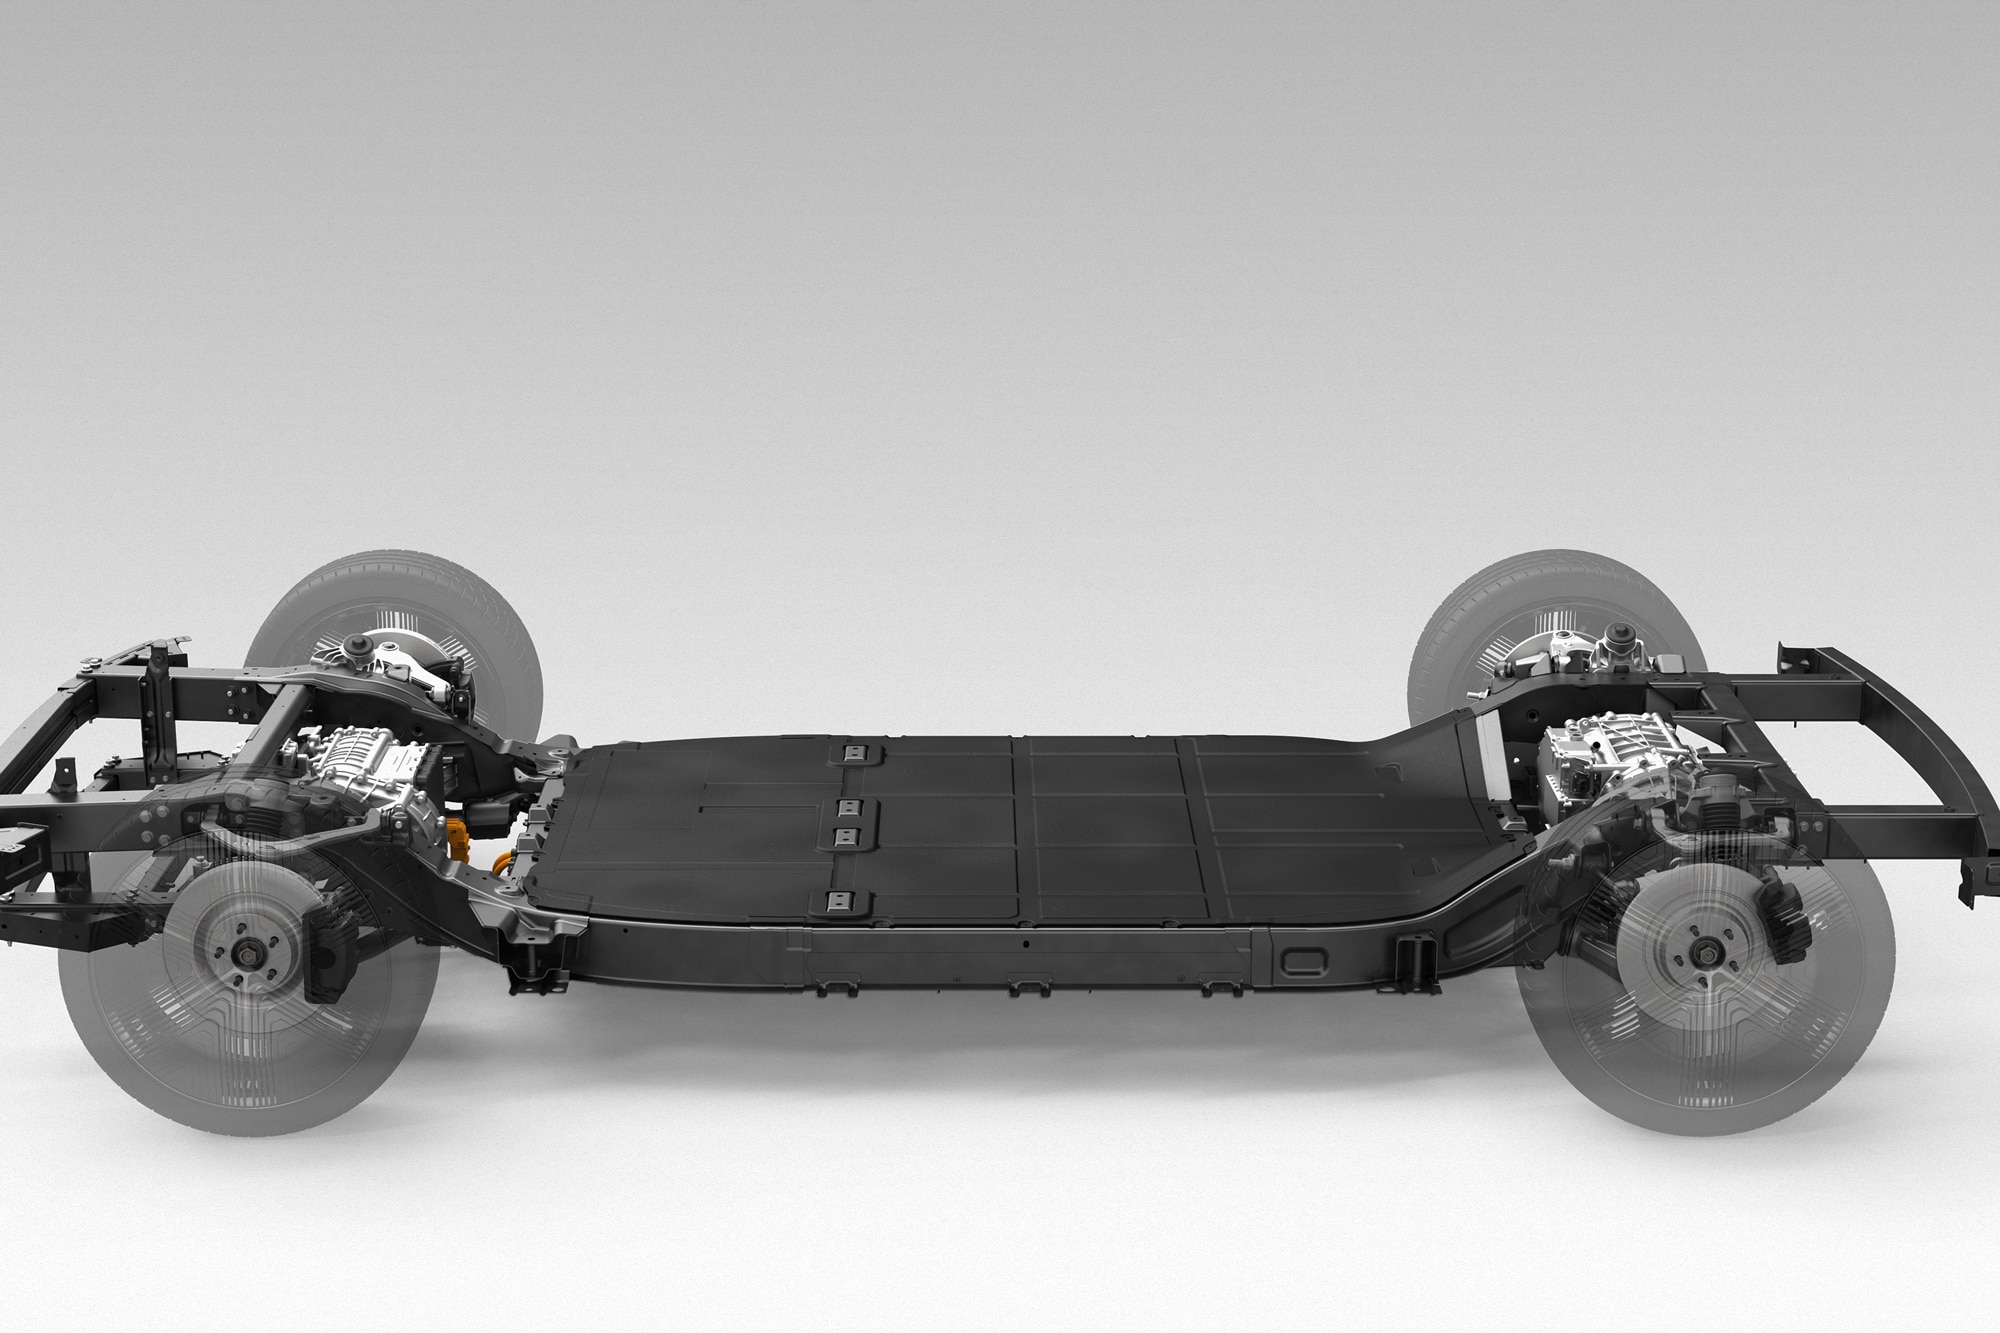 Hyundai undefined Canoo to co-develop all-electric platform for future electric vehicles Hyundai skateboard platform